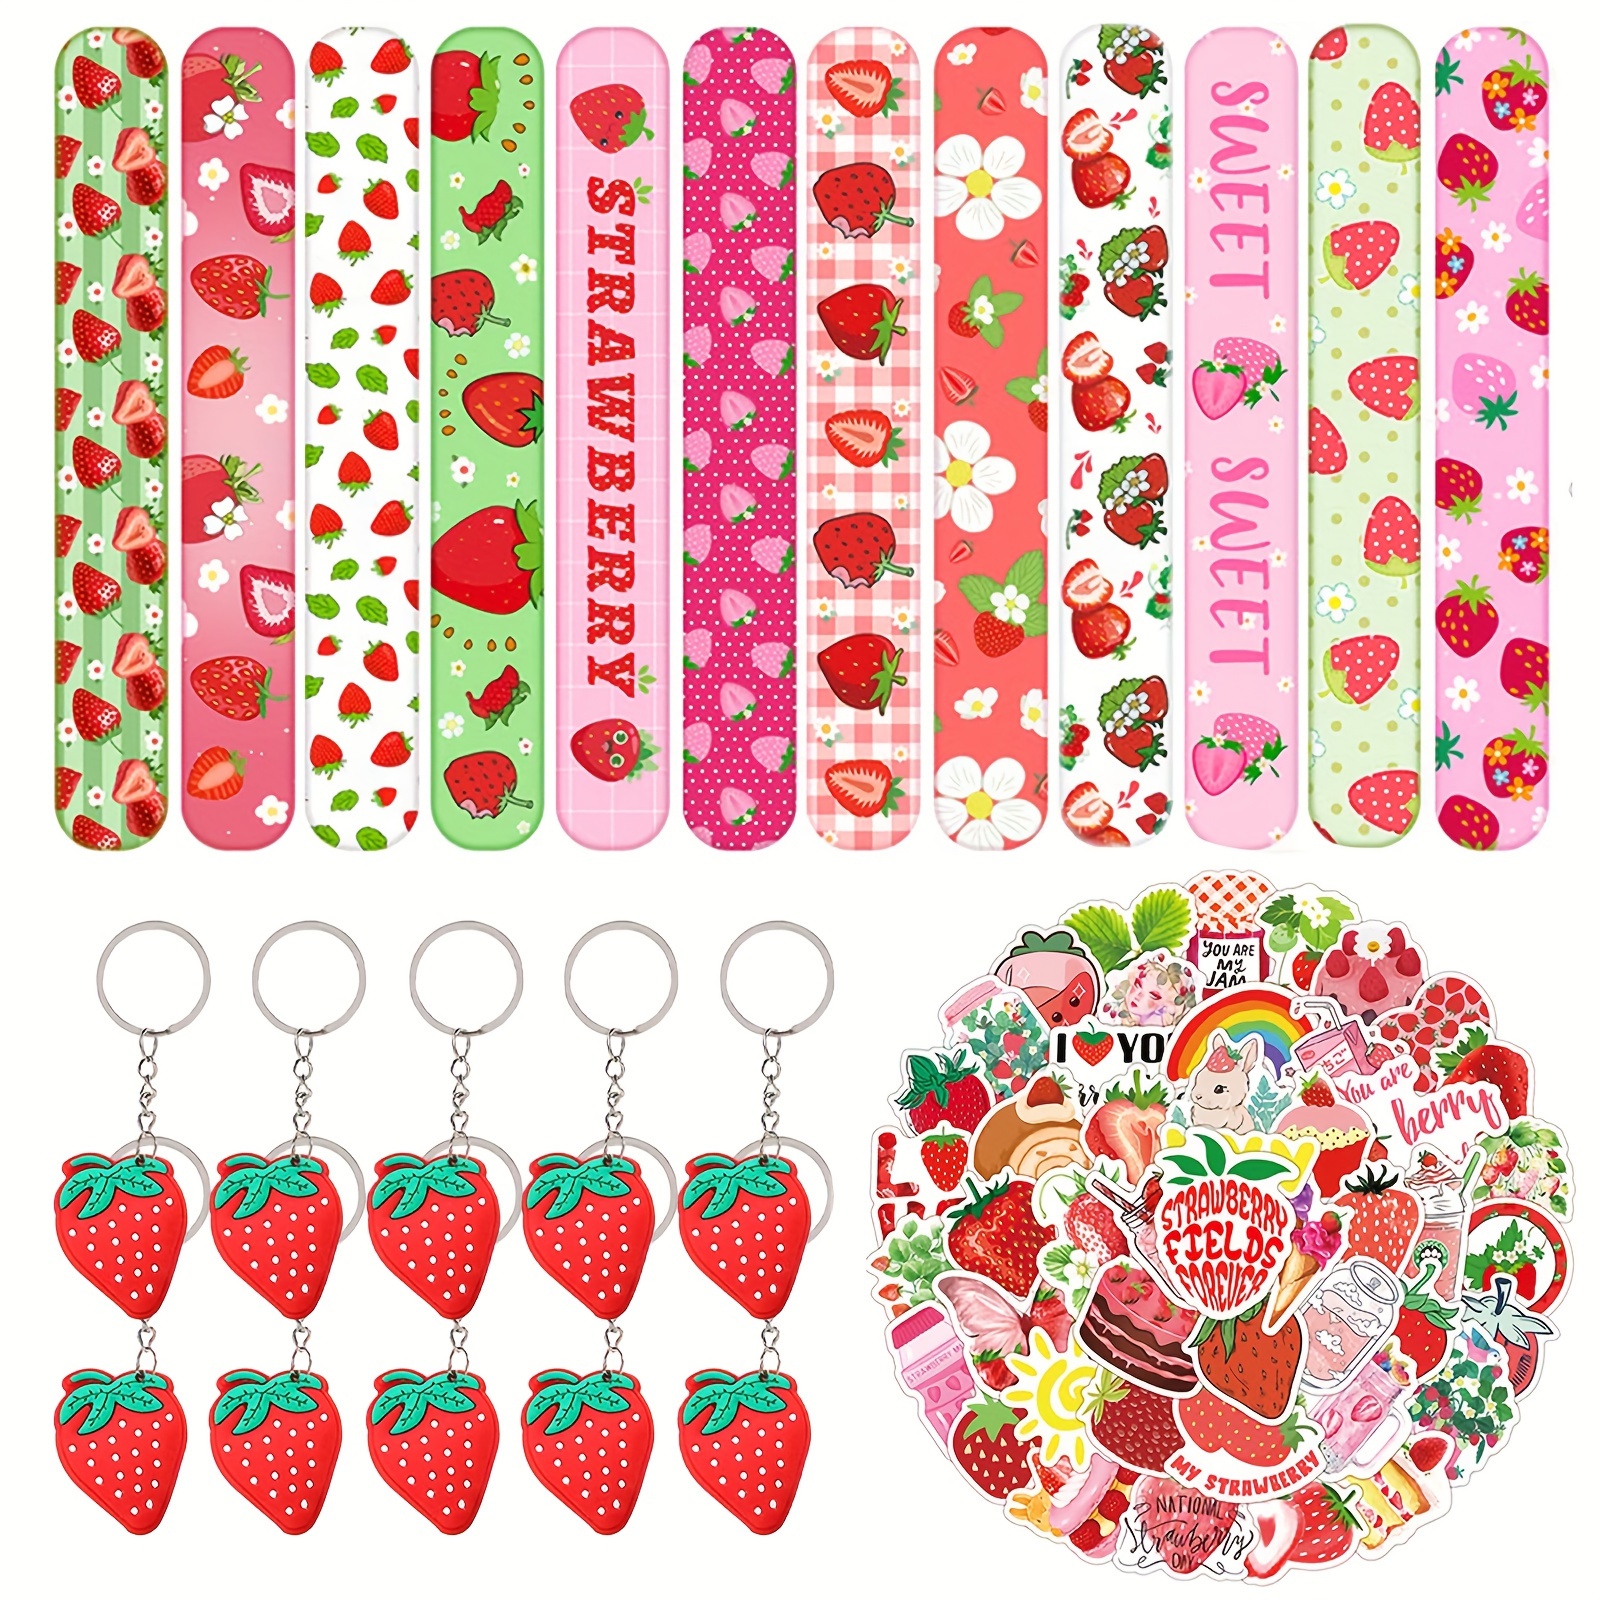 

72pcs, Strawberry Theme Strawberry Party Favors, 50pcs Stickers, 10pcs Key Chain, 12 Snap Rings, Baby Shower Berry 1st Birthday Party Supplies Decorations